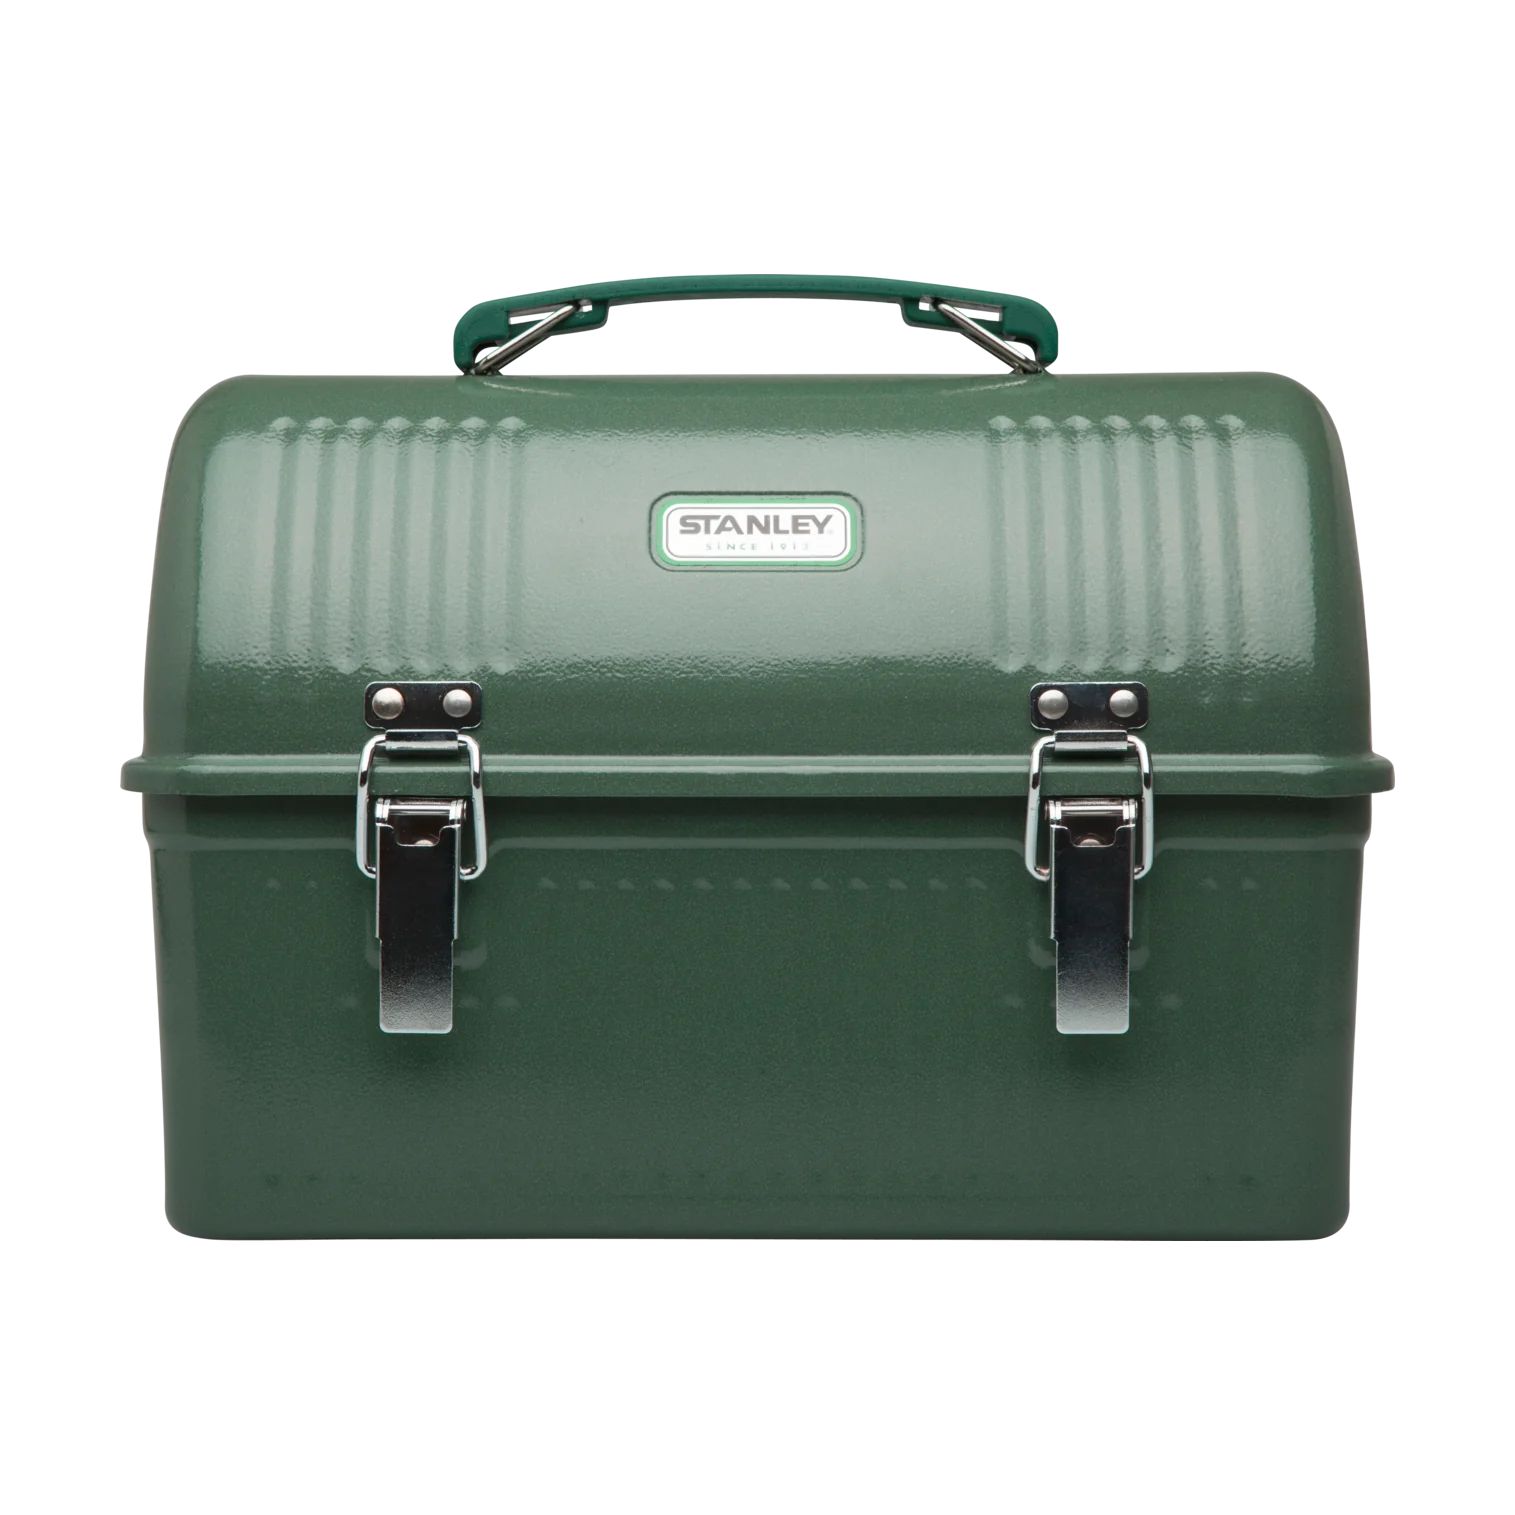 Classic Metal Lunch Box | 10 oz | Stainless Steel | Stanley | Stanley PMI US